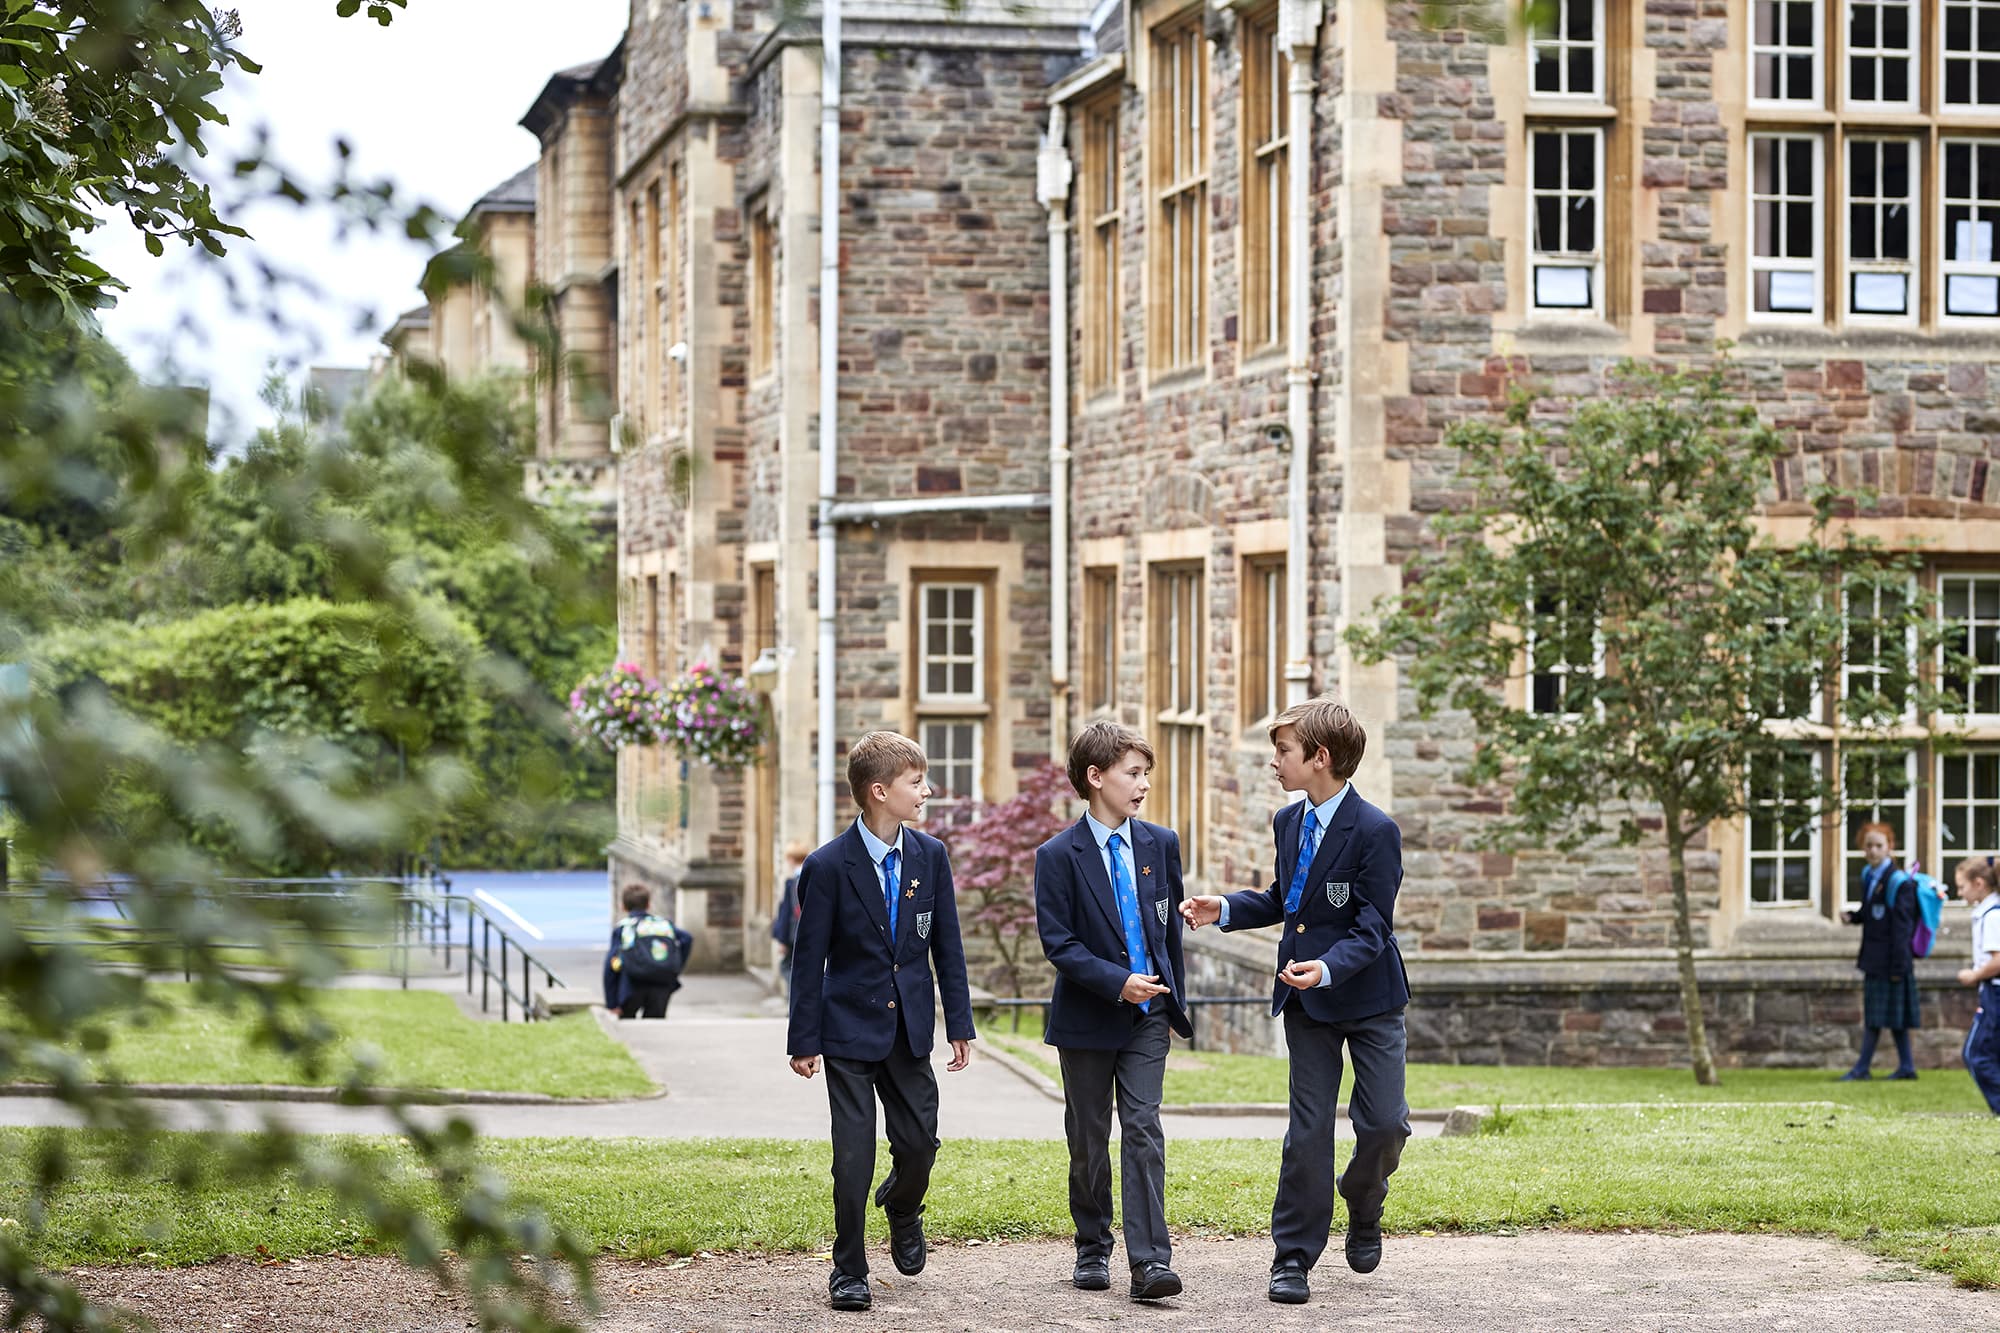 Preparatory School Clifton College Offers Pupils Aspirational Learning 